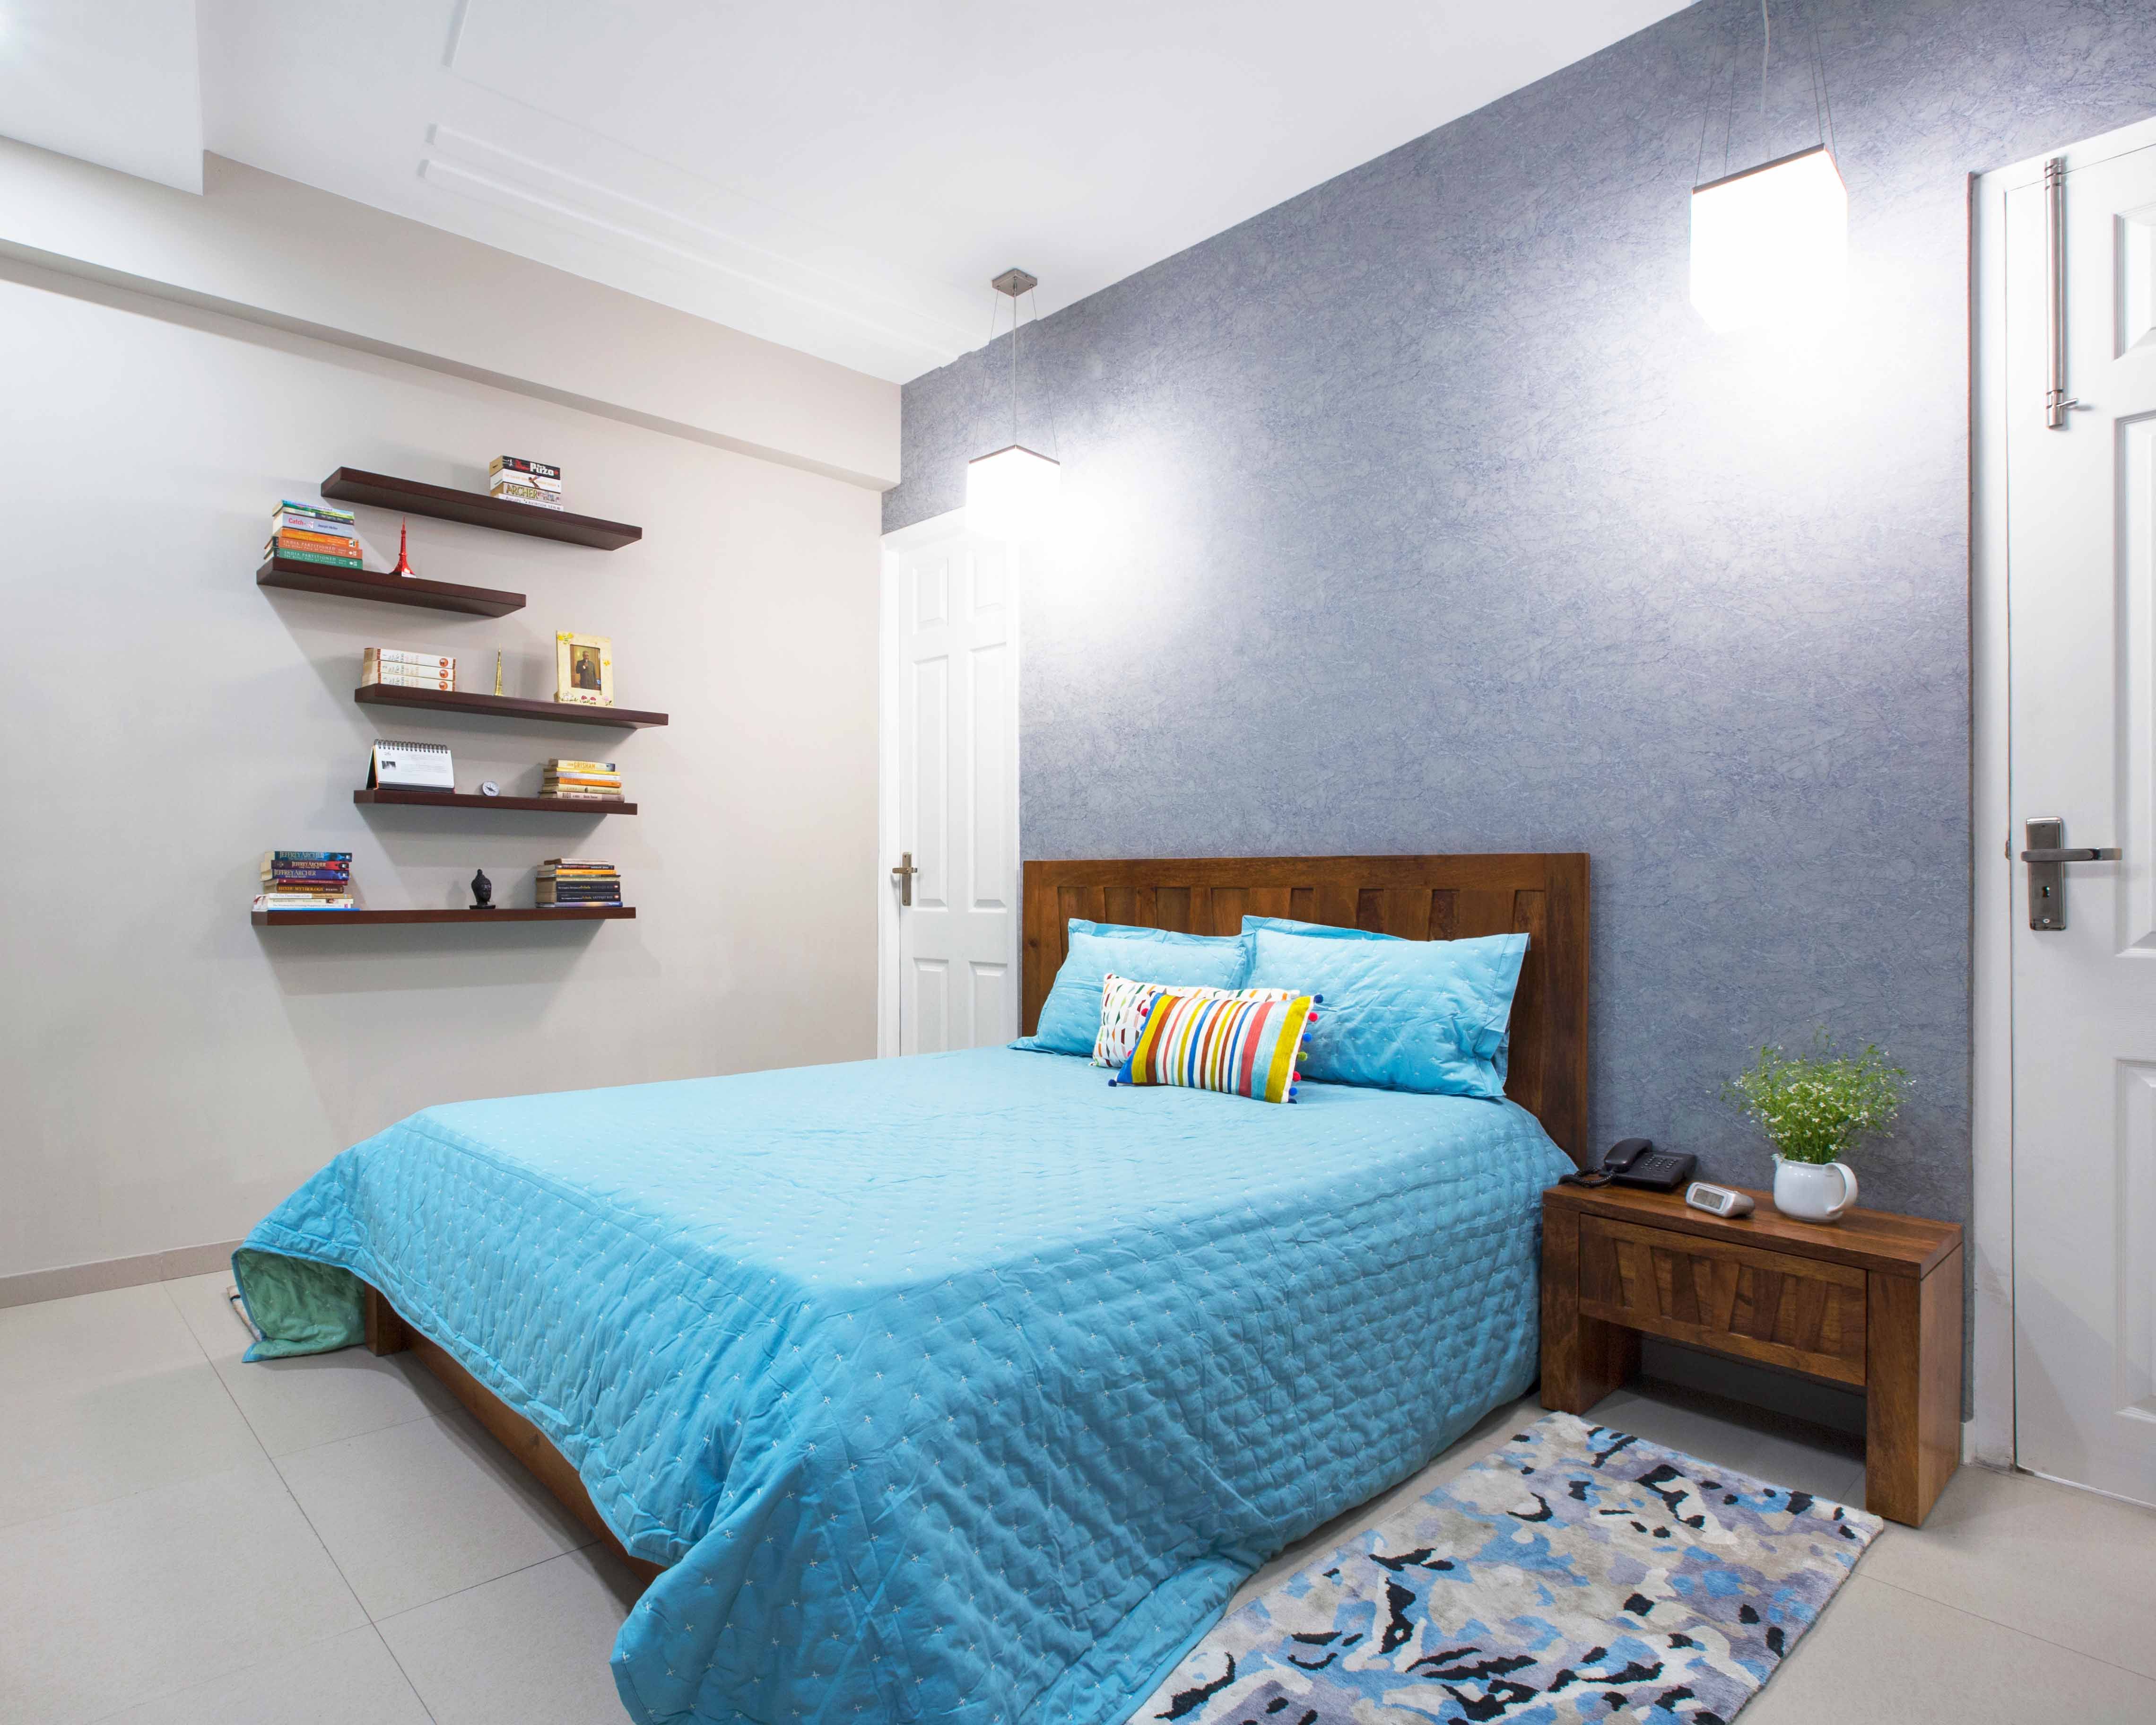 Modern Blue Guest Bedroom Design With Wooden Headboard And Wall-Mounted Shelves